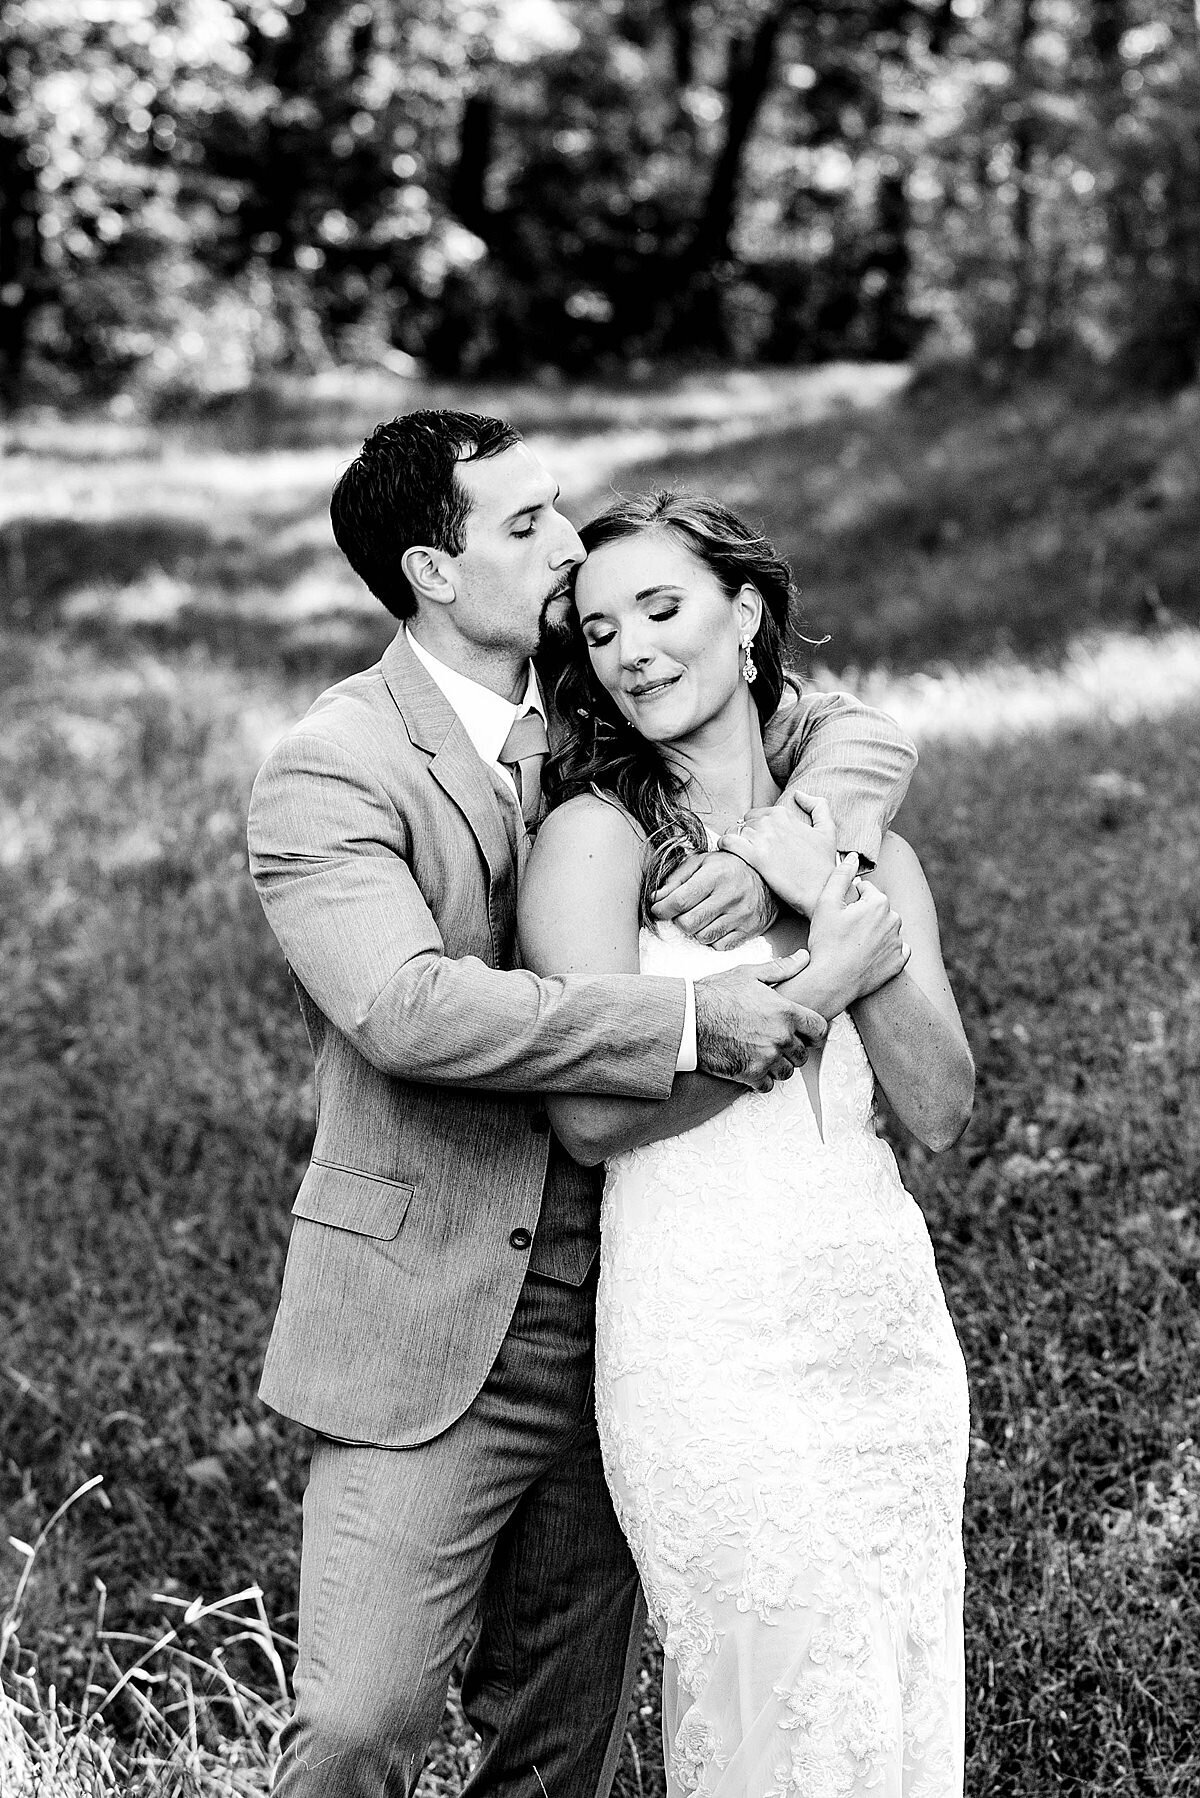 Black and white photo of groom embracing bride and kissing her on the forehead